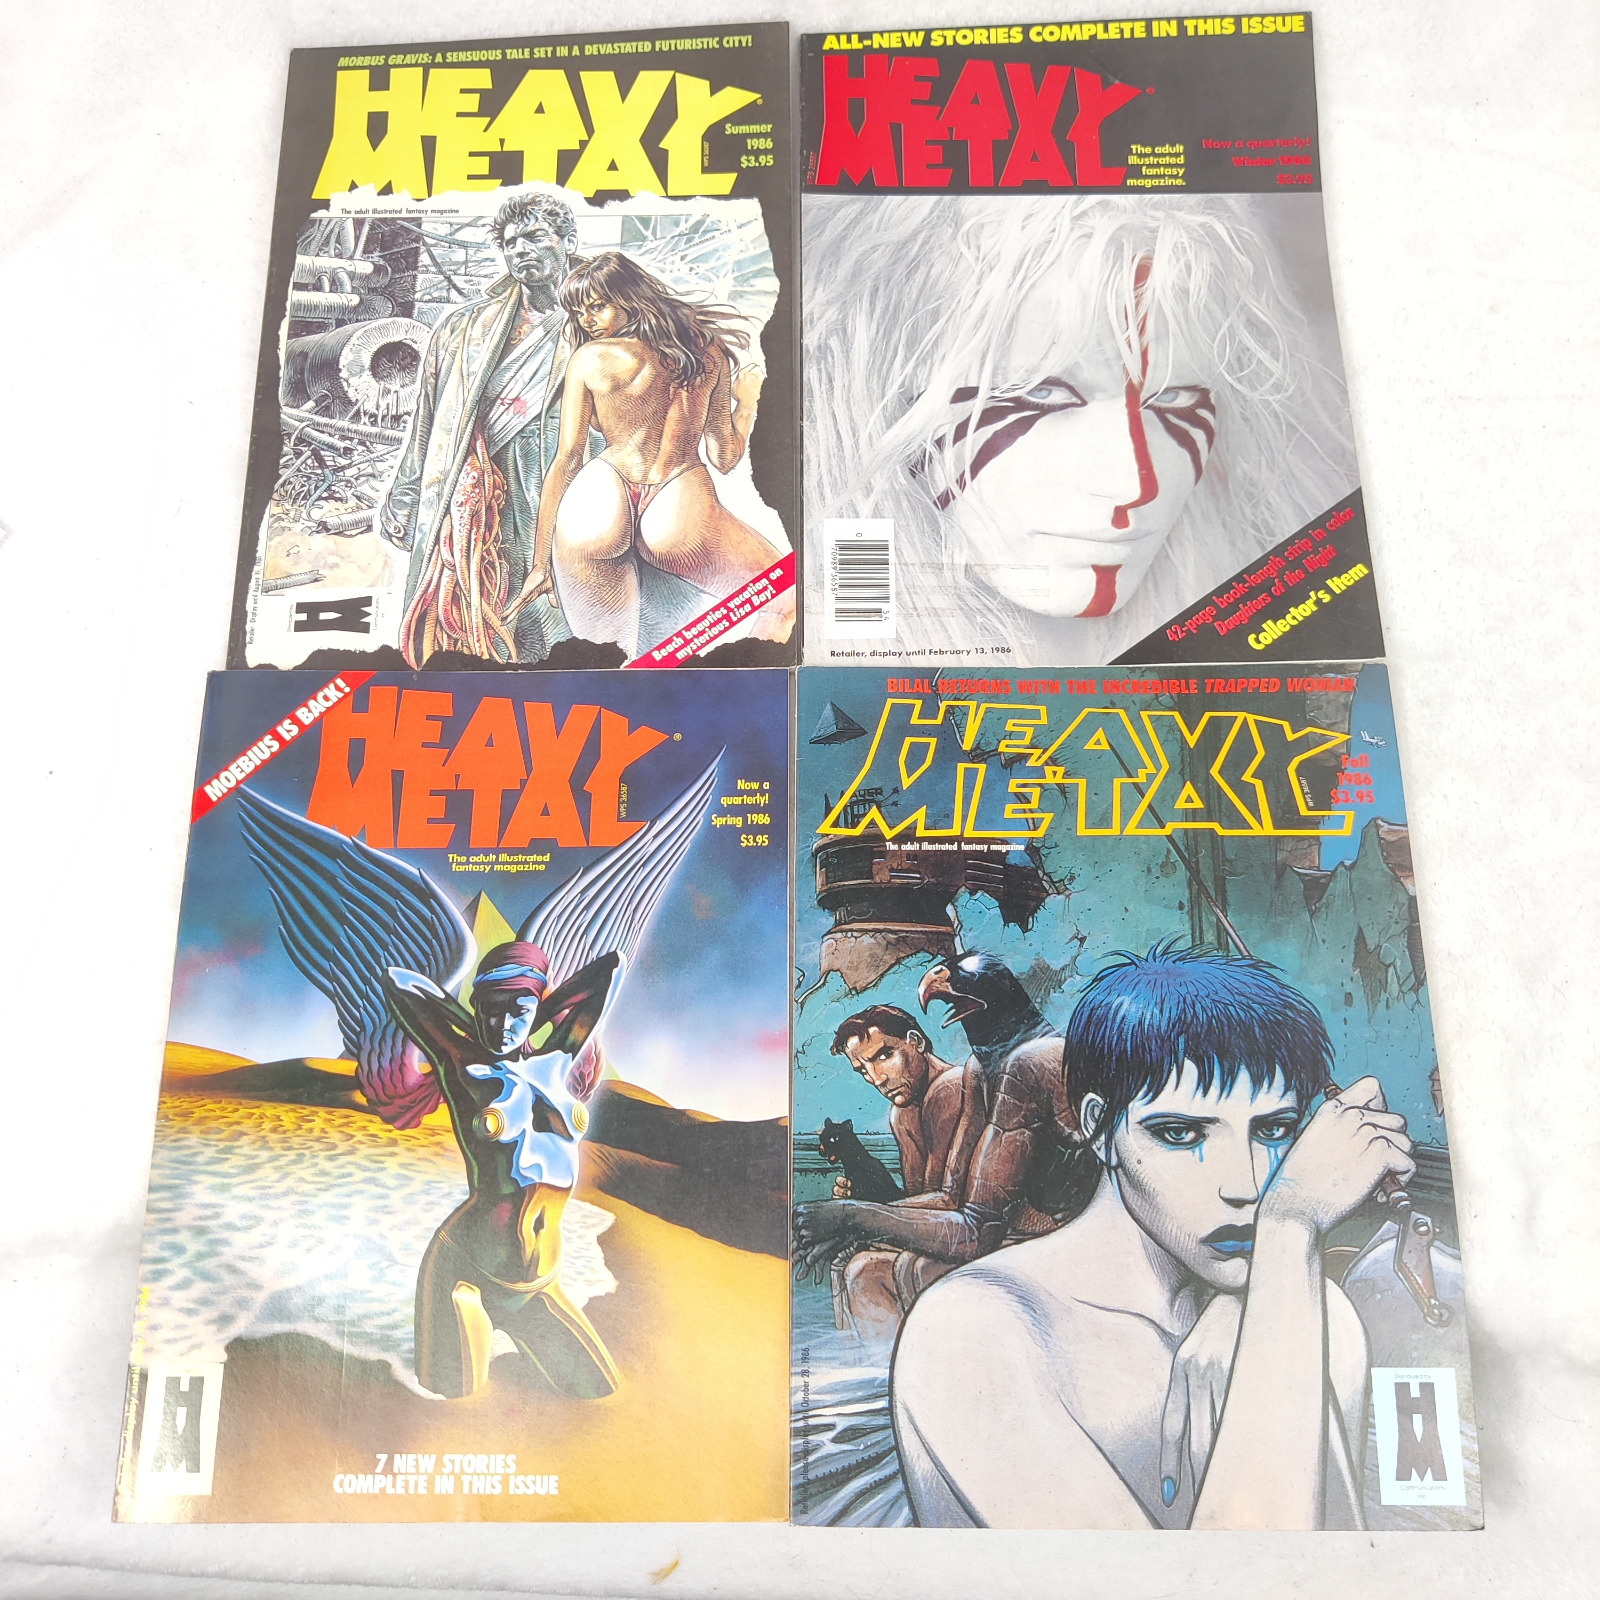 Heavy metal magazine 1986 complete set great condition Fast